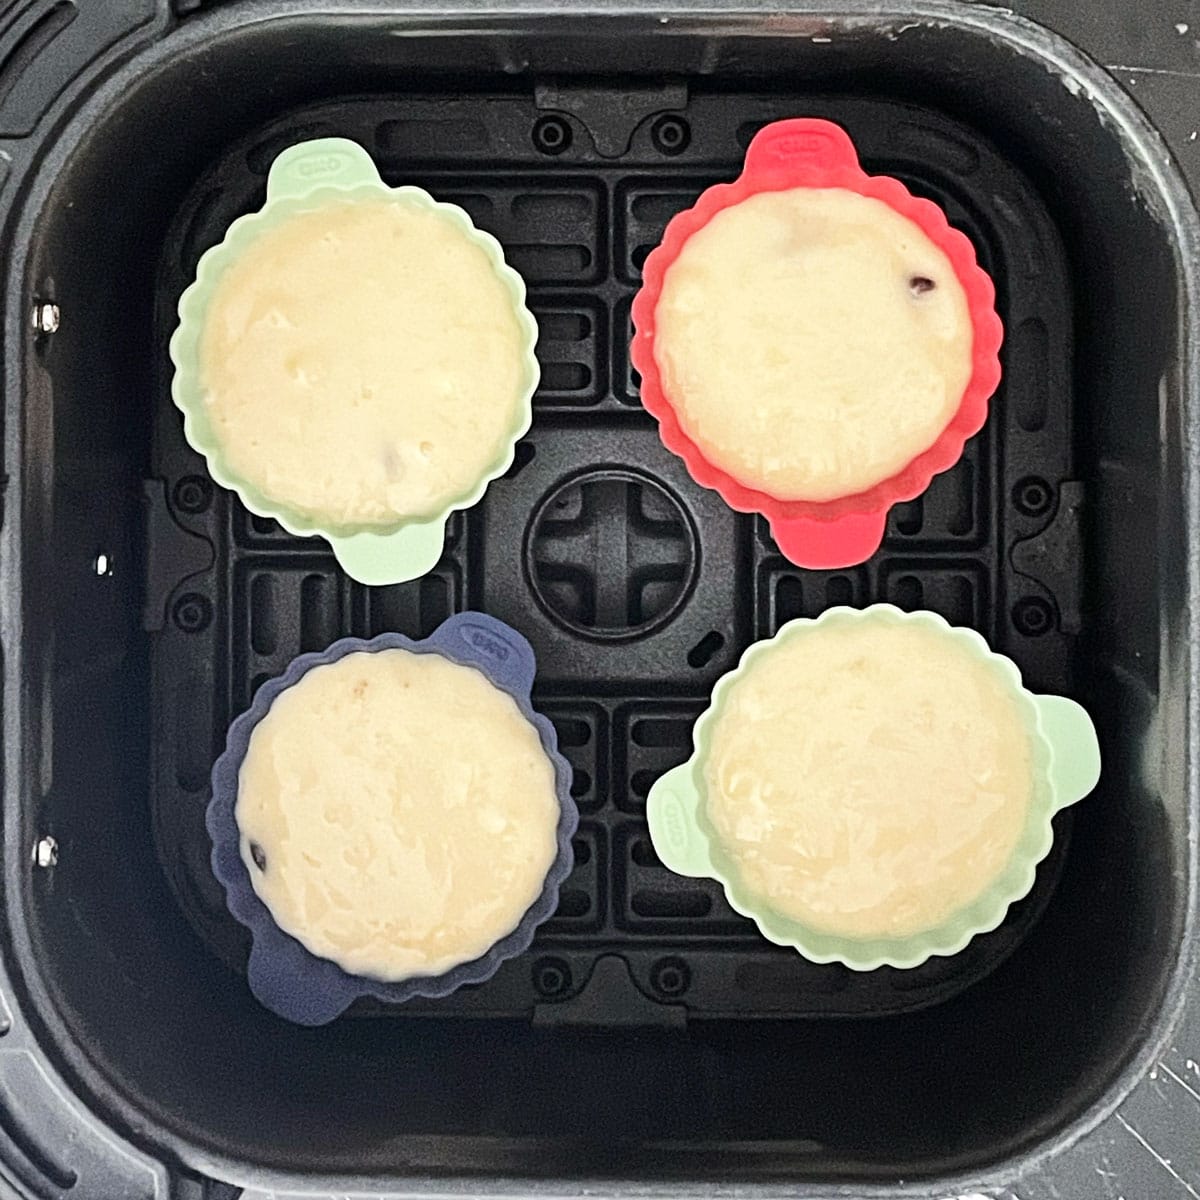 Banana muffin batter in moulds.